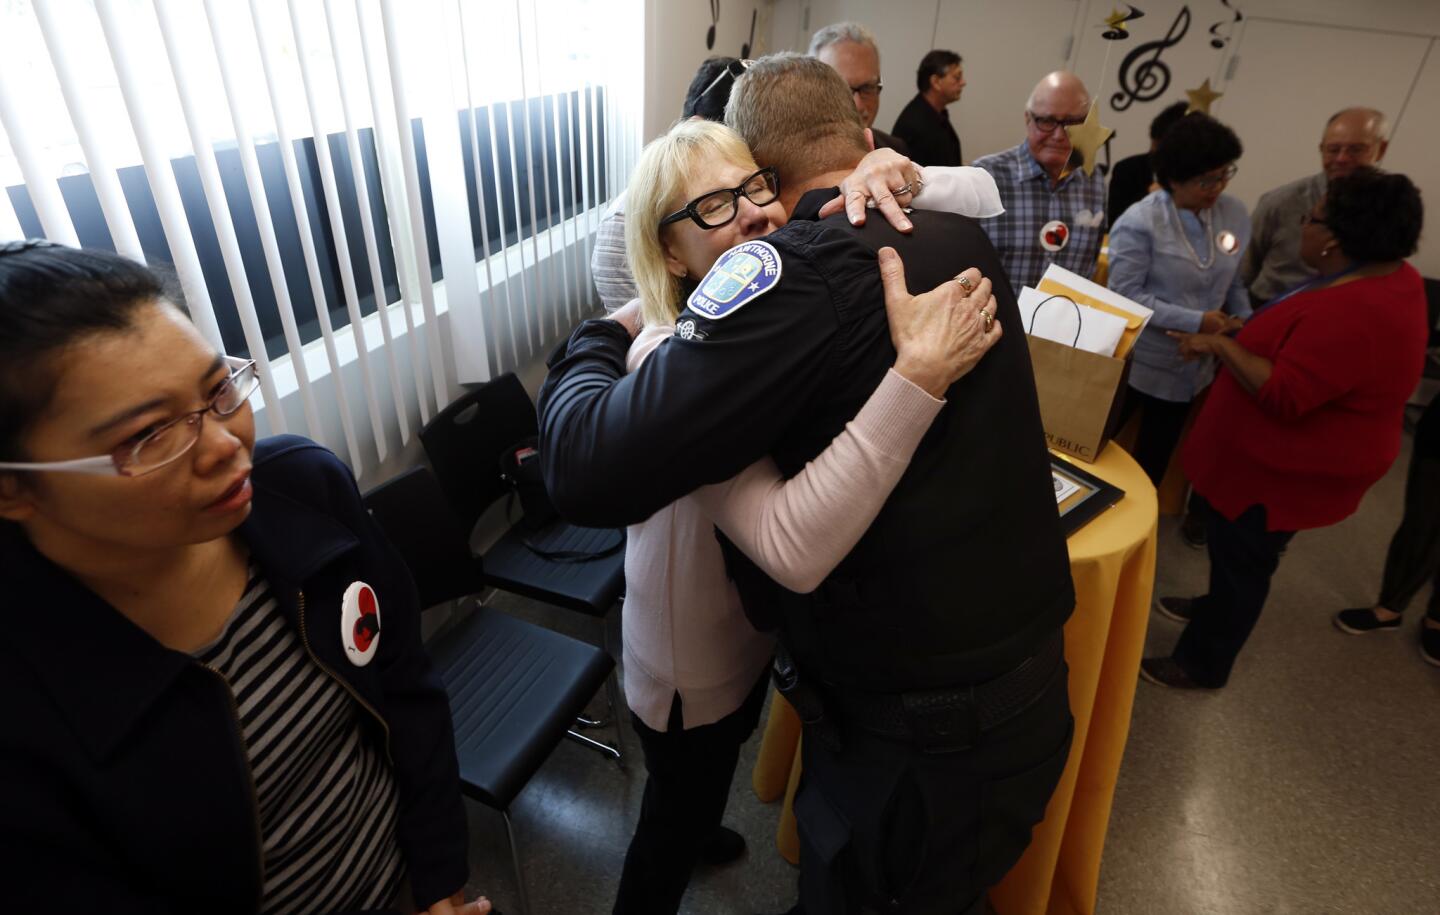 Sheri Kessel, center, hugs Hawthorne Police Officer Sean Judd at Children of Promise Preparatory Academy in Inglewood, which renamed its music classroom in honor of Kessel's son Benny Golbin.